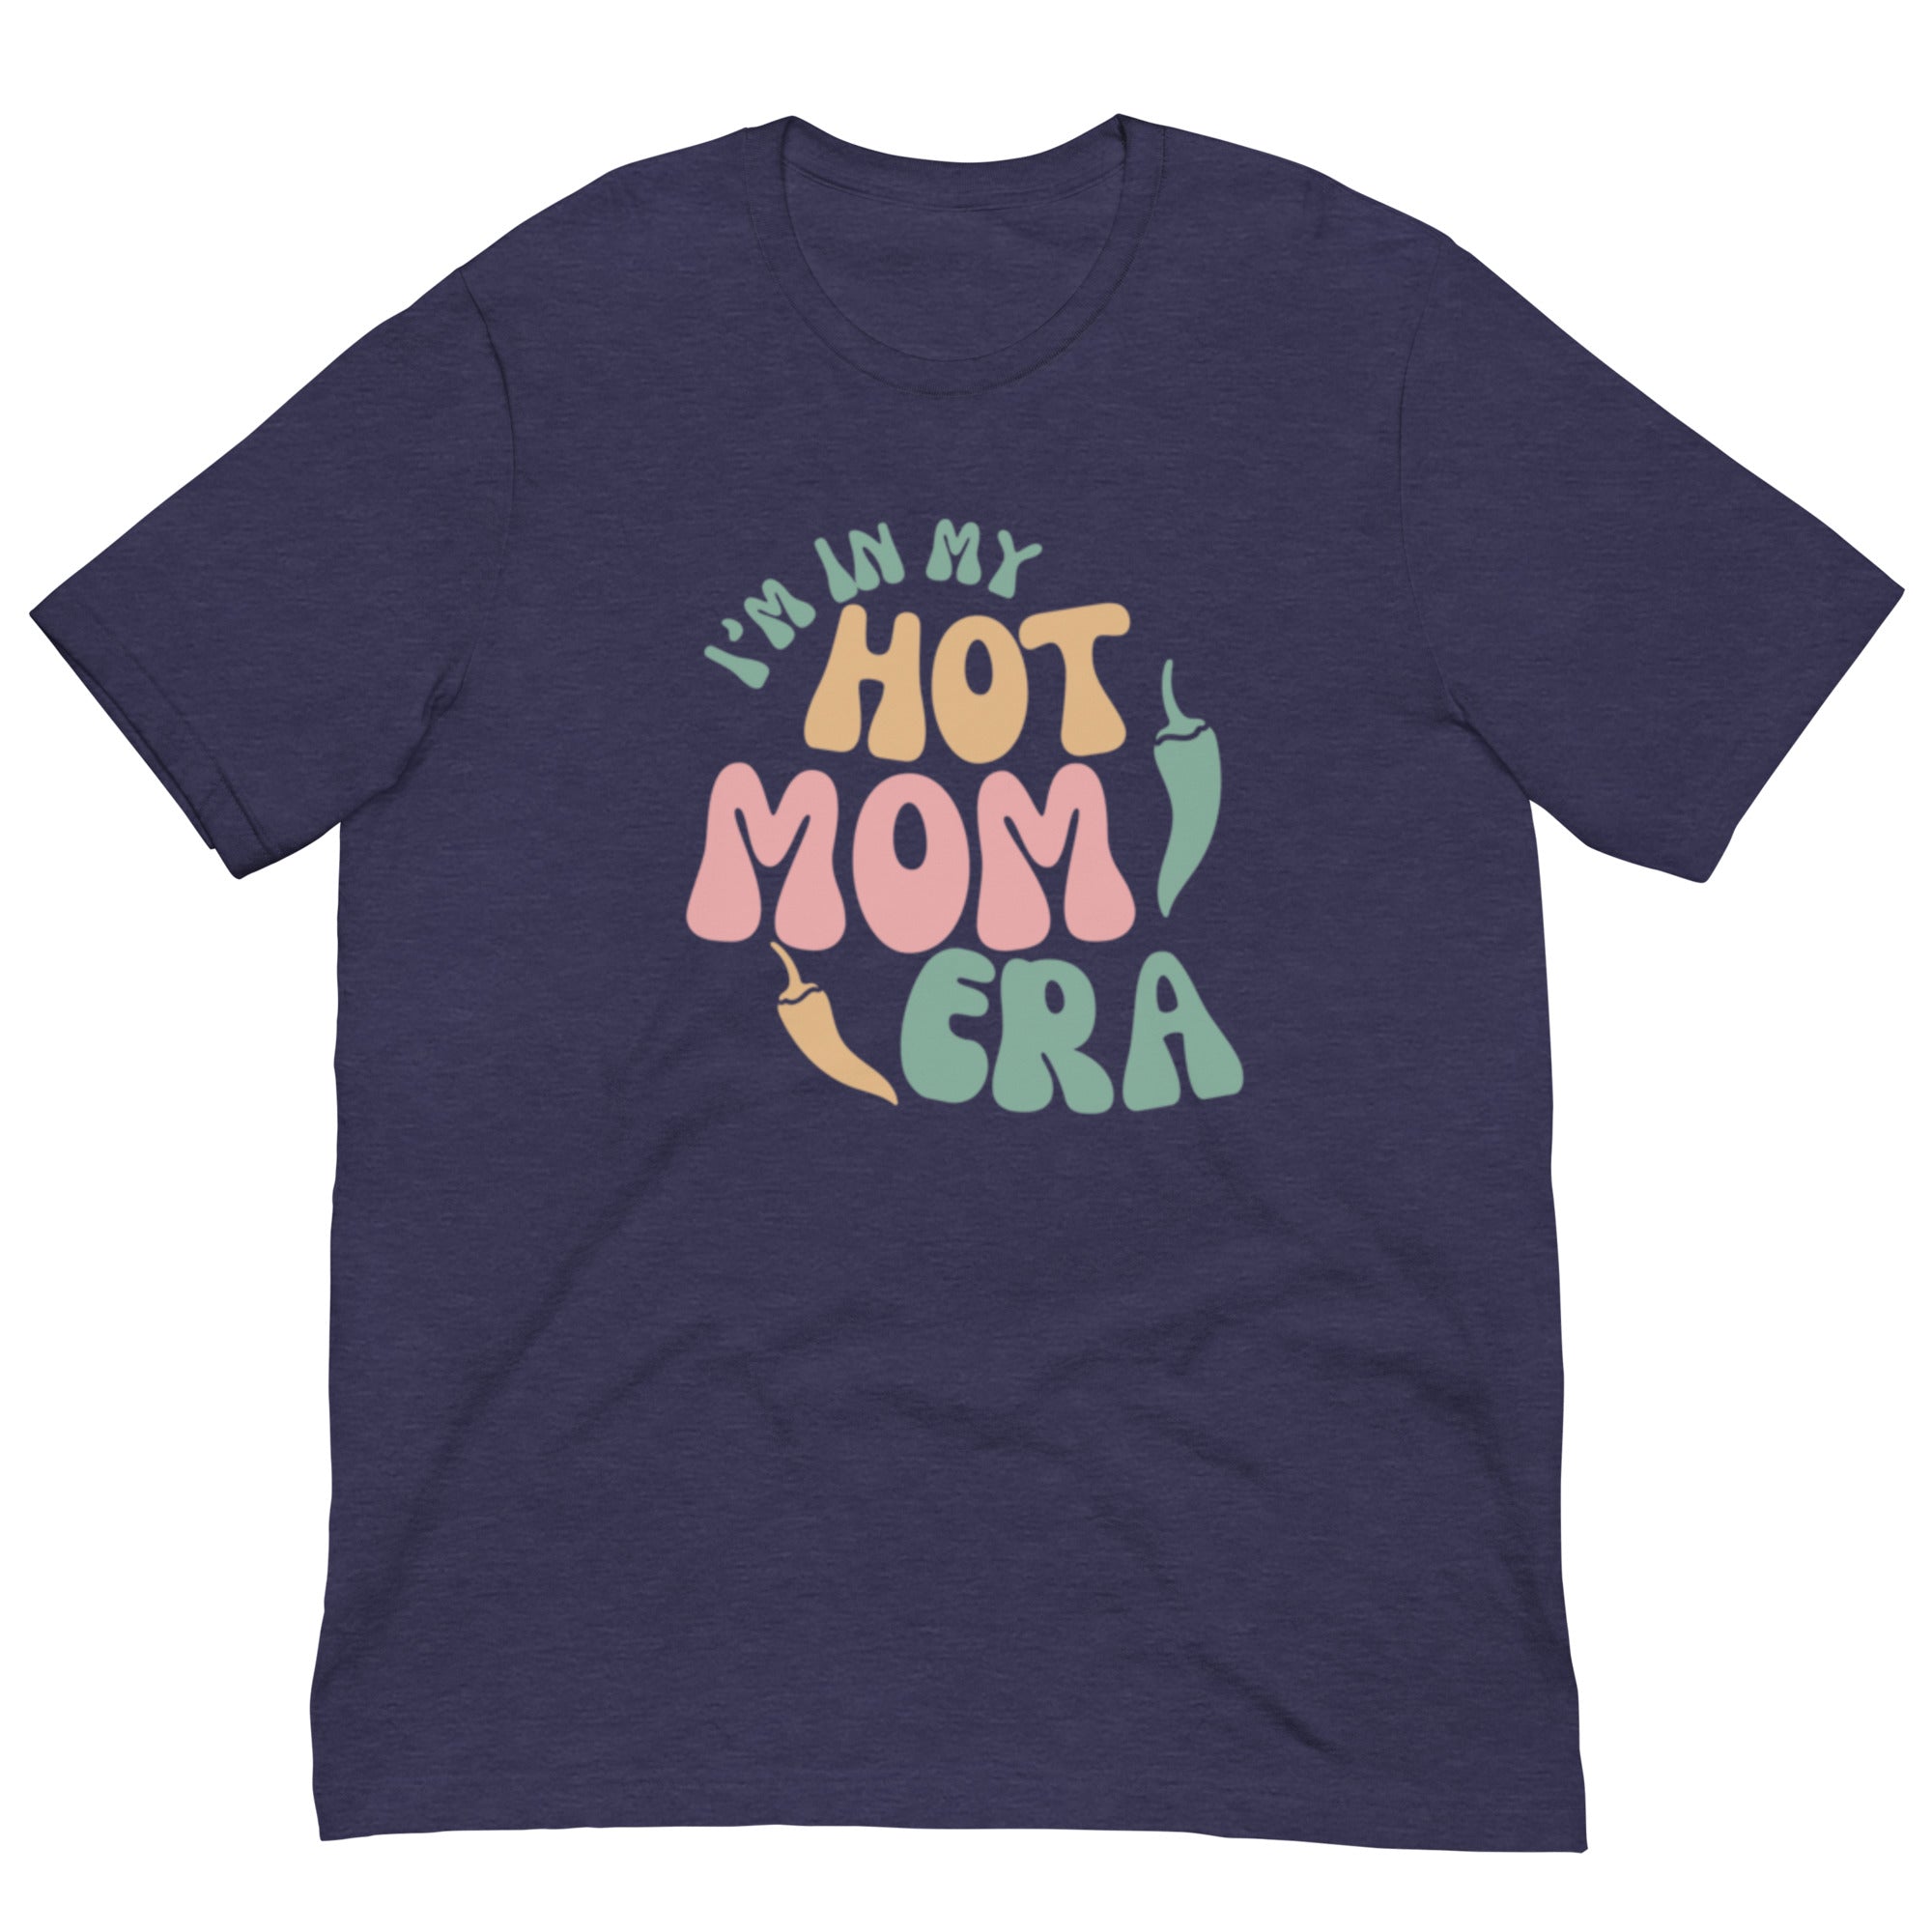 A navy blue breathable Era Shirt featuring colorful, playful text that reads "in my hot mom era" with the design incorporating leaf motifs and a wavy pattern.